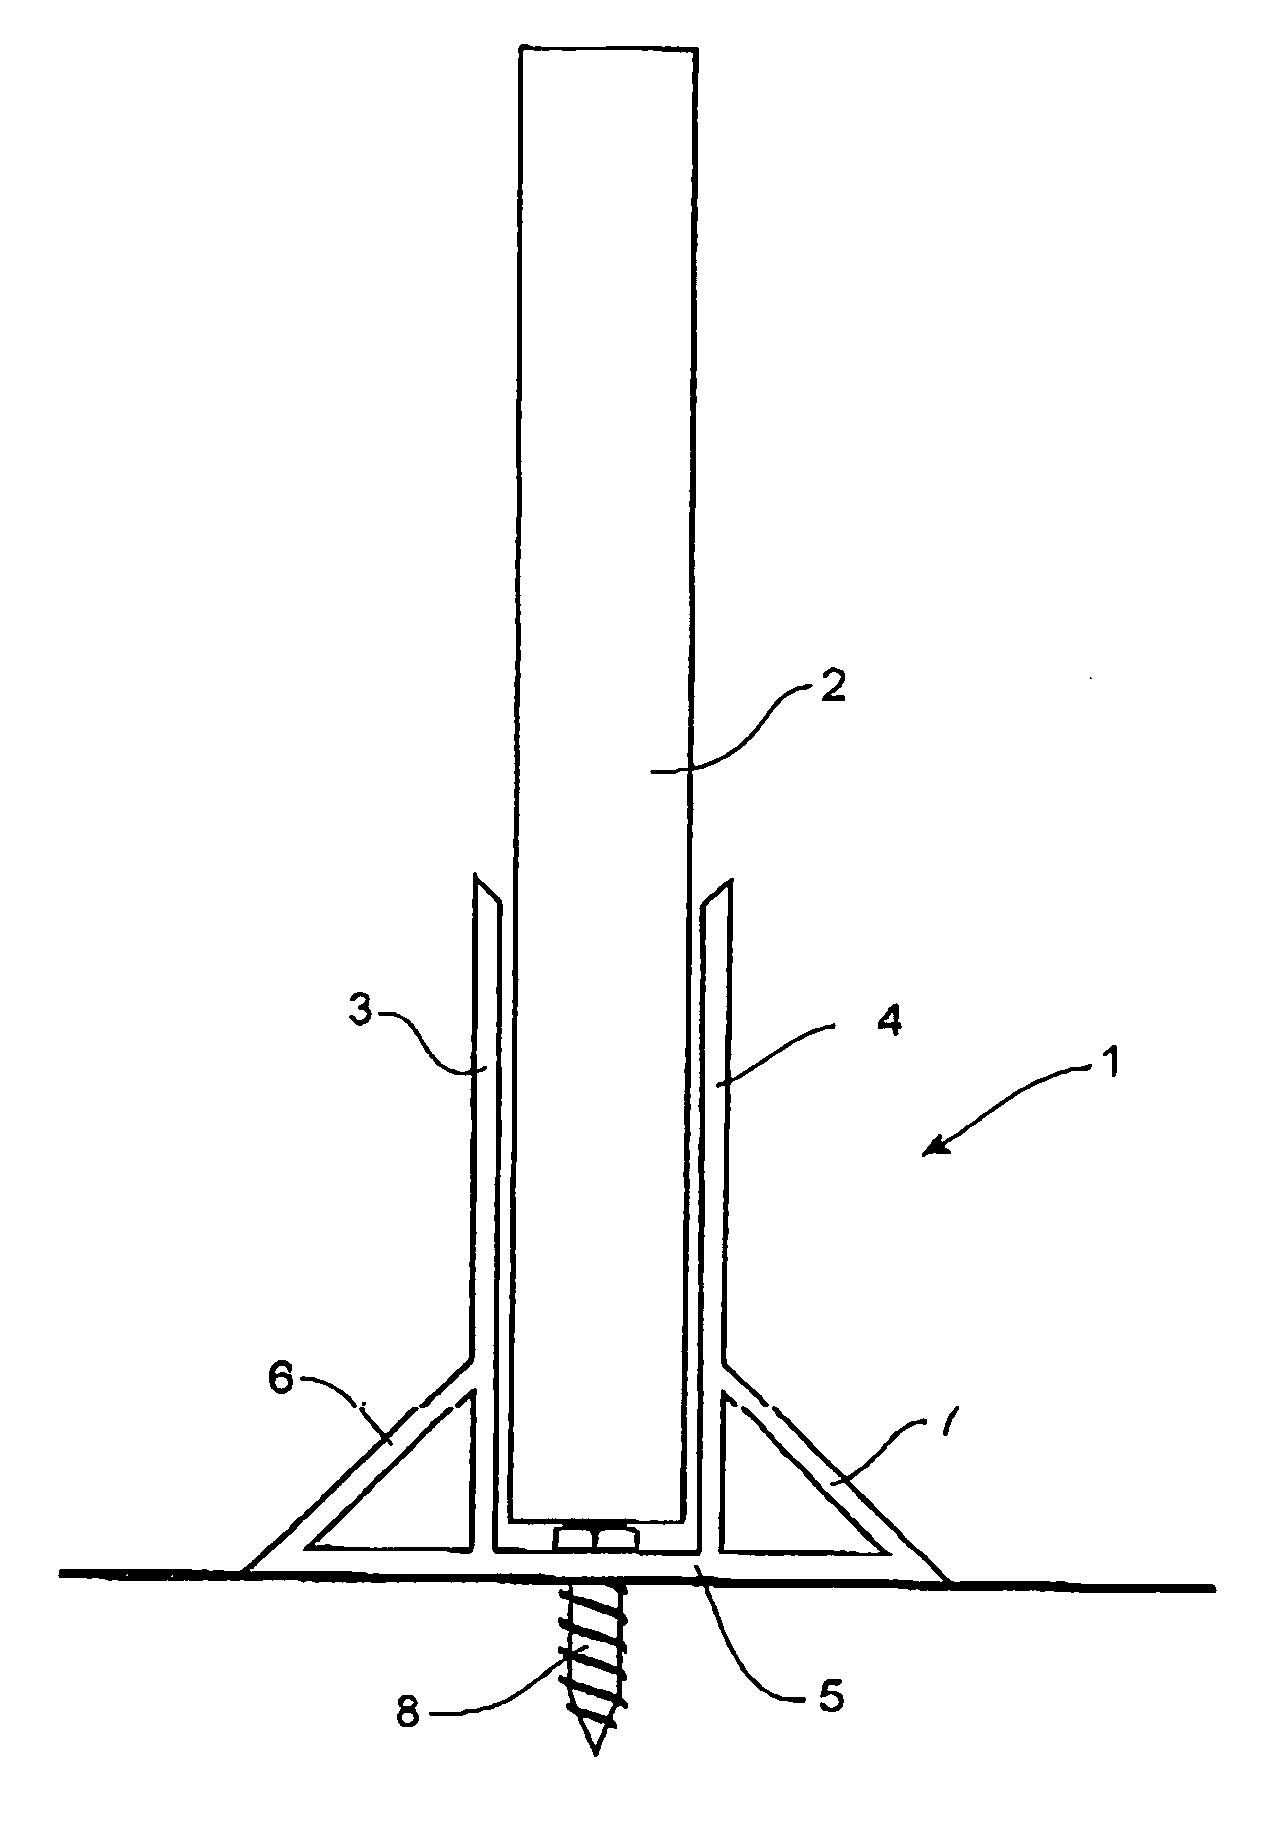 Apparatus and method for forming concrete panels